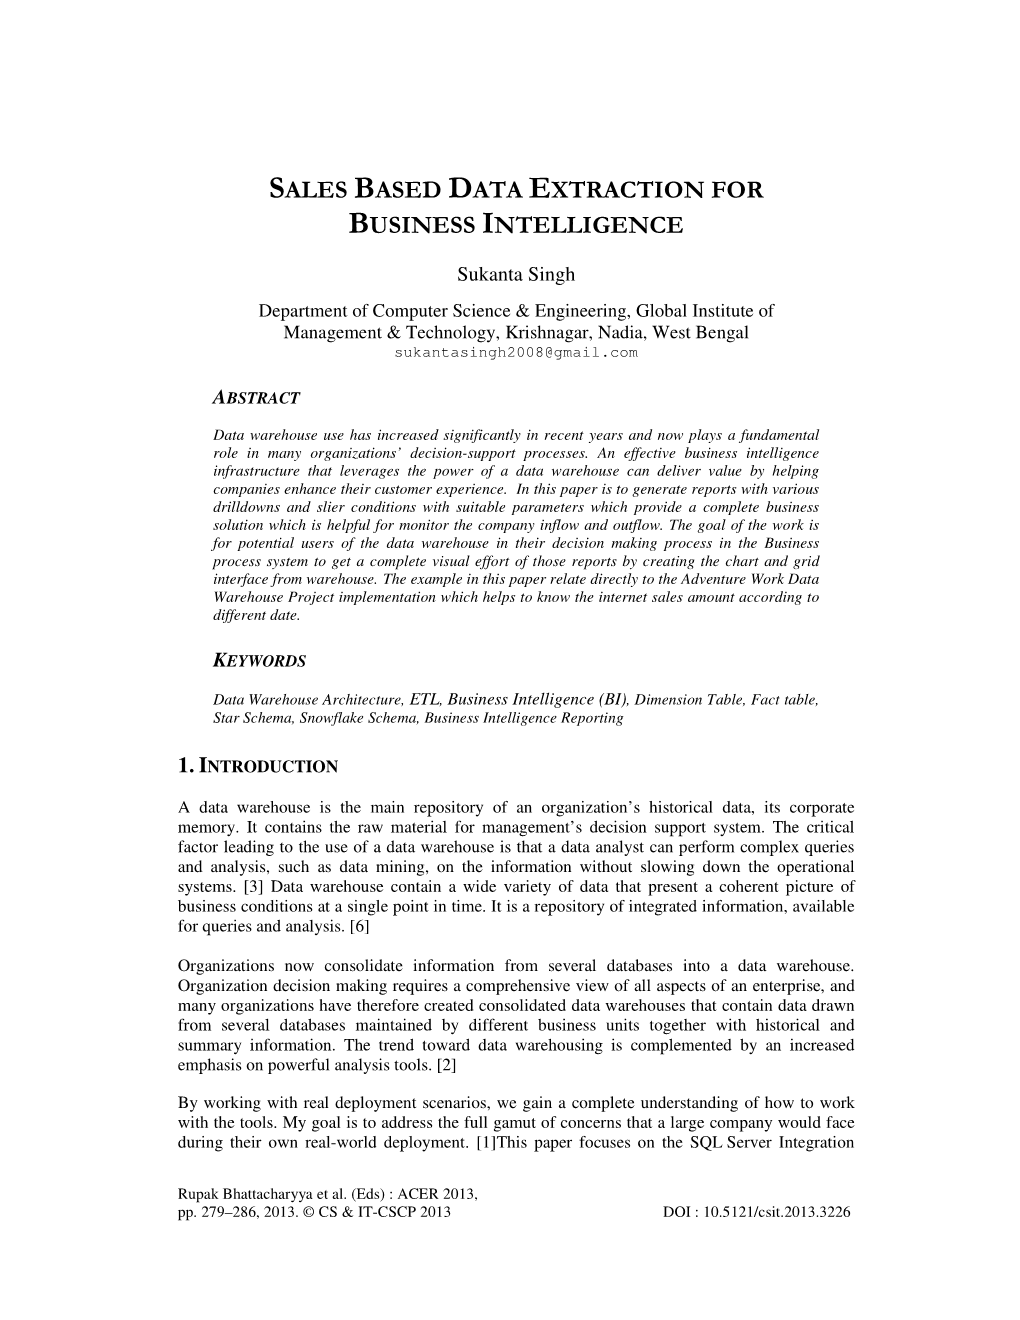 Sales Based Data Extraction for Business Intelligence